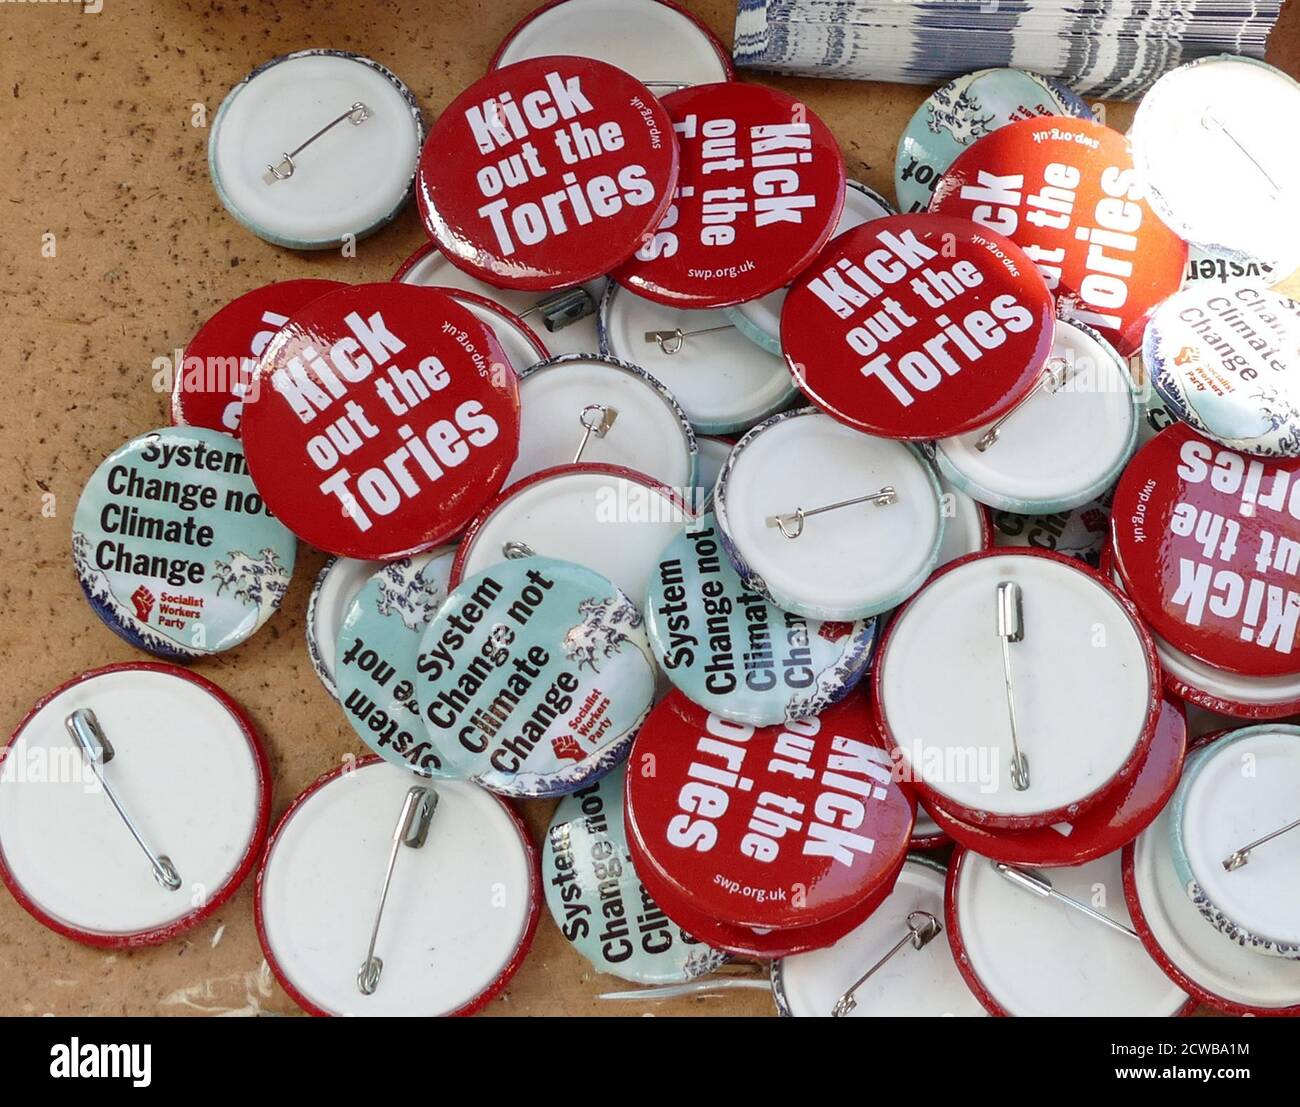 Socialist Workers Party badges, London, during the 20th September 2019 climate strike. Also known as the Global Week for Future, a series of international strikes and protests to demand action be taken to address climate change. The 20 September protests were likely the largest climate strikes in world history. Organisers reported that over 4 million people participated in strikes worldwide, including 300000 people joined UK protests Stock Photo